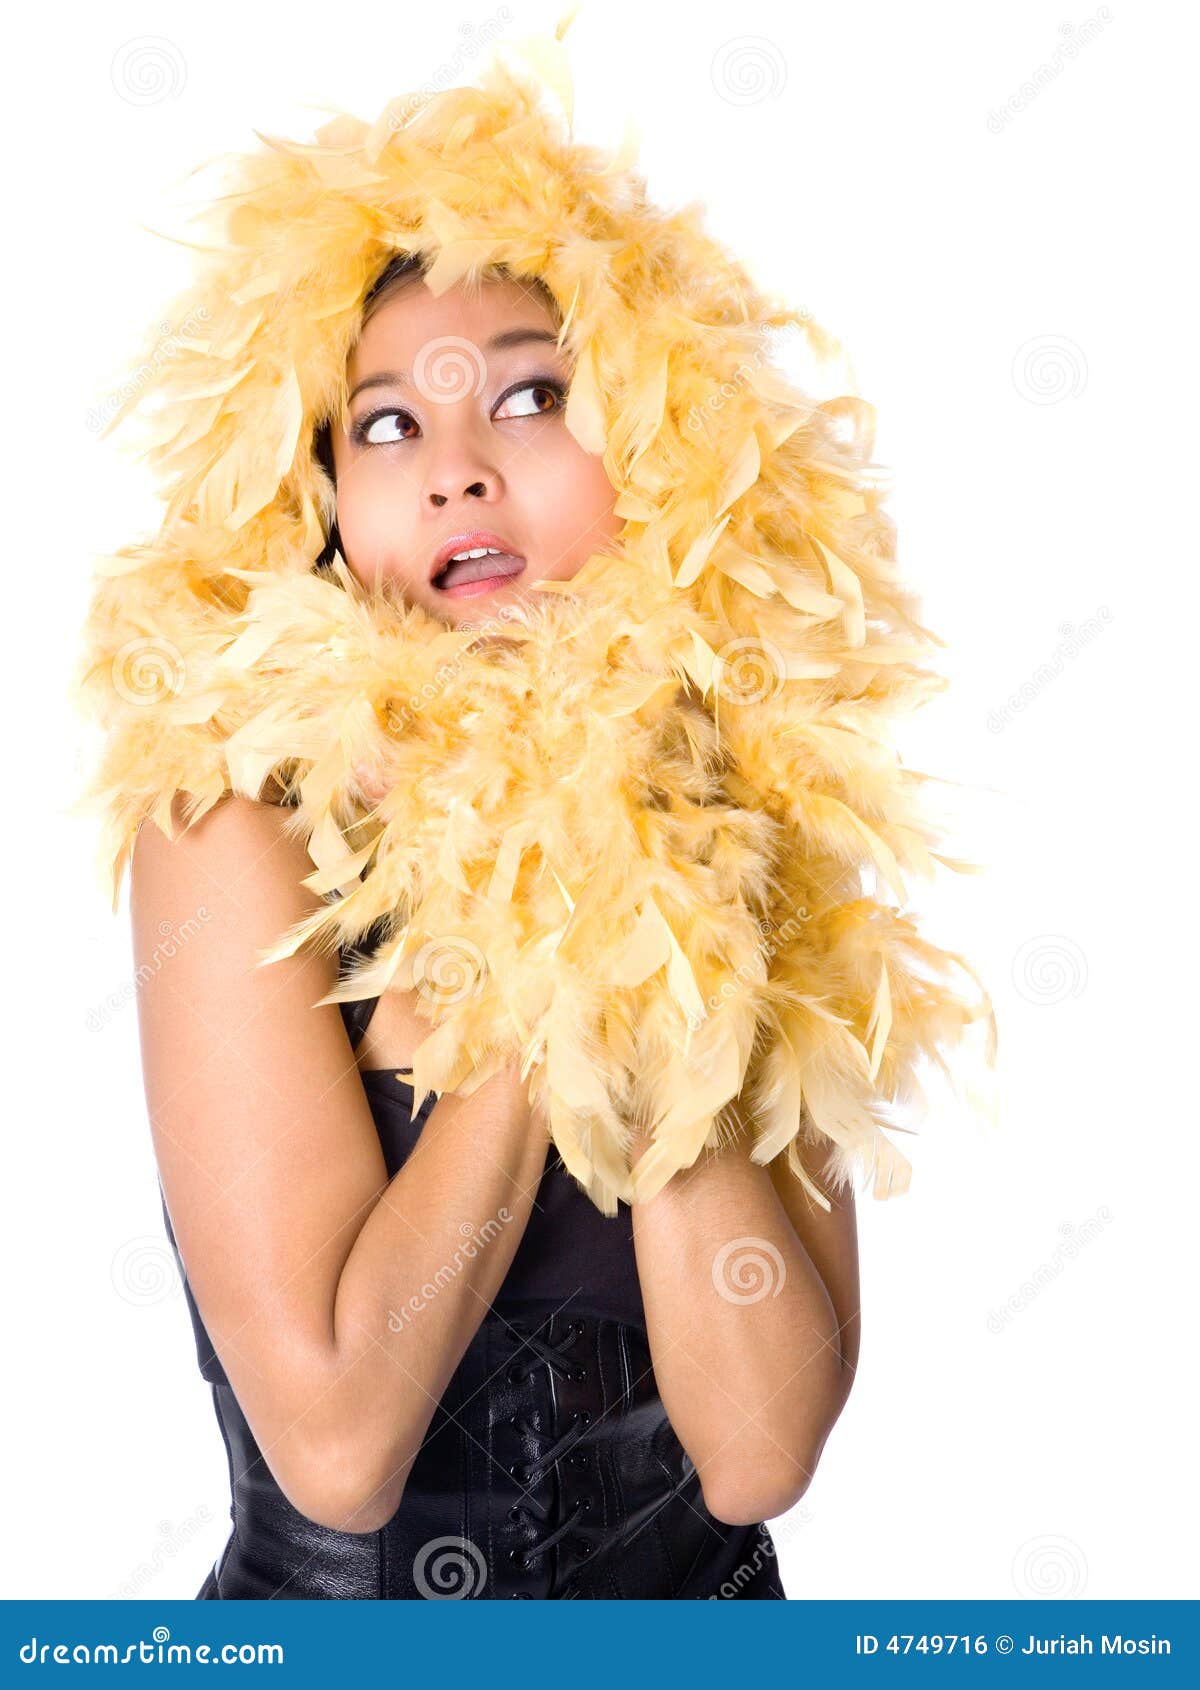 Model Wrapped In Yellow Feather Boa Royalty Free Stock Image Image 4749716